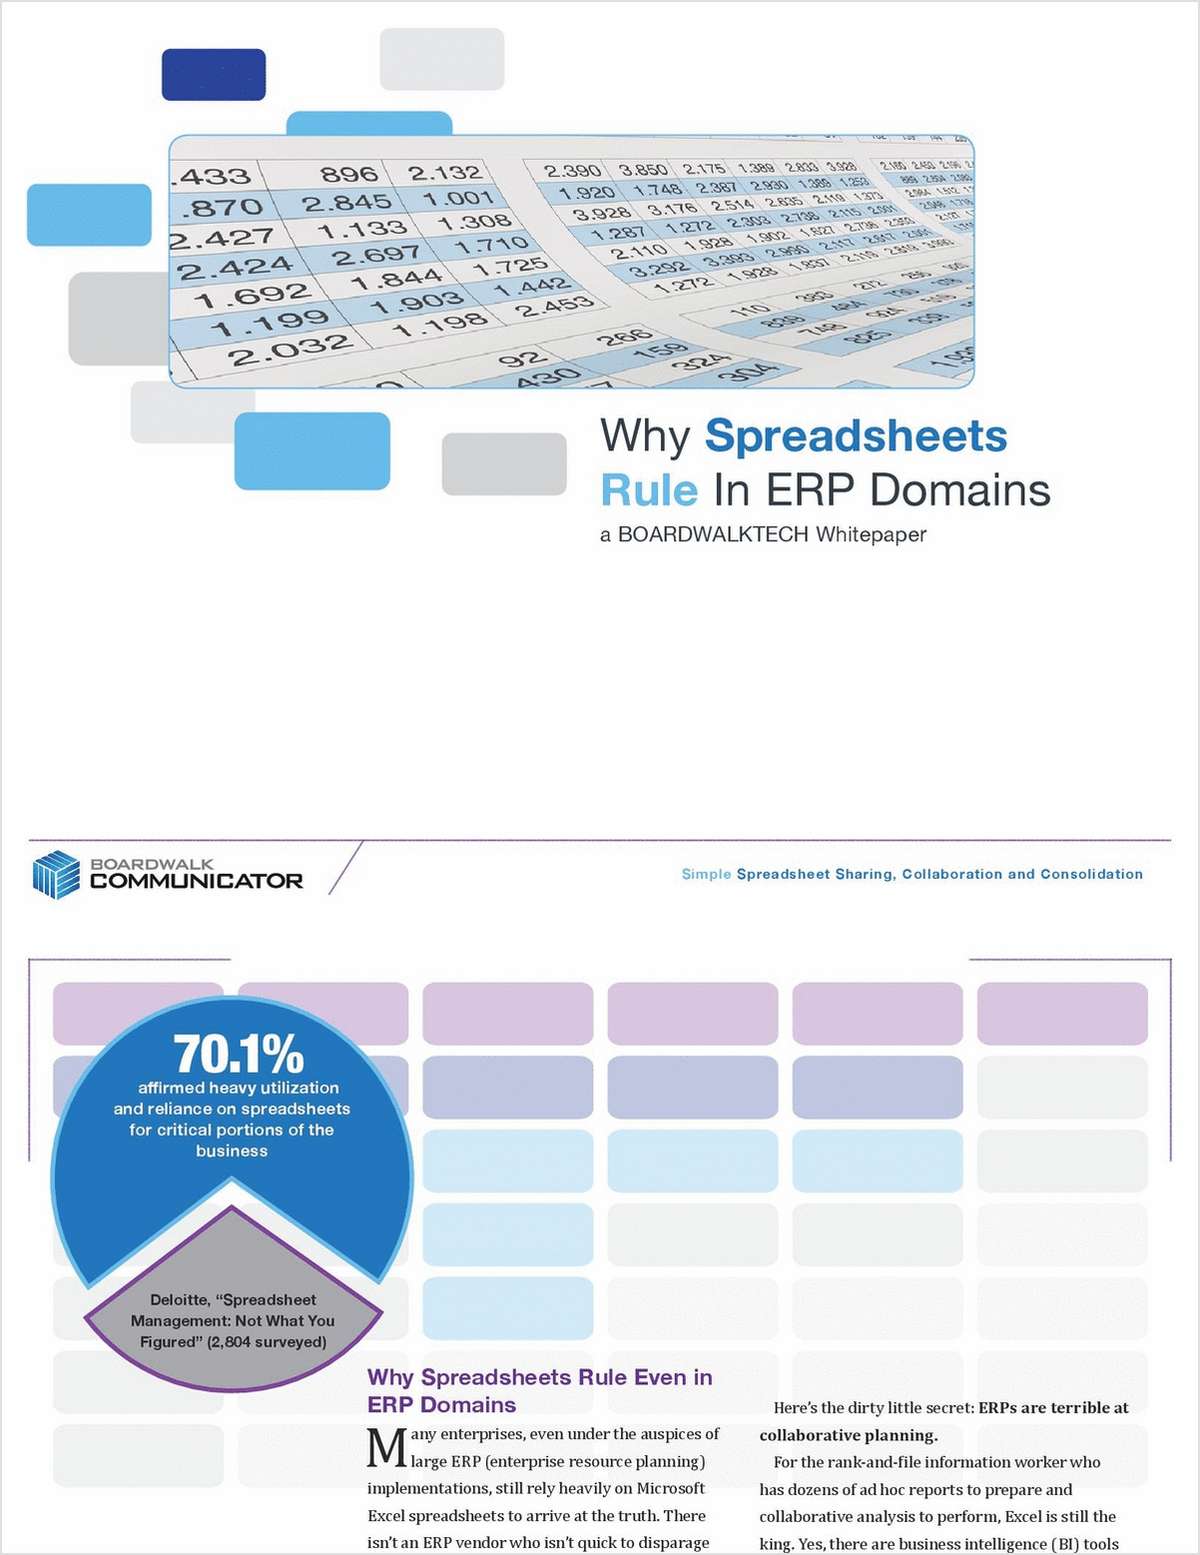 Why Do Spreadsheets Rule Even in ERP Environments?